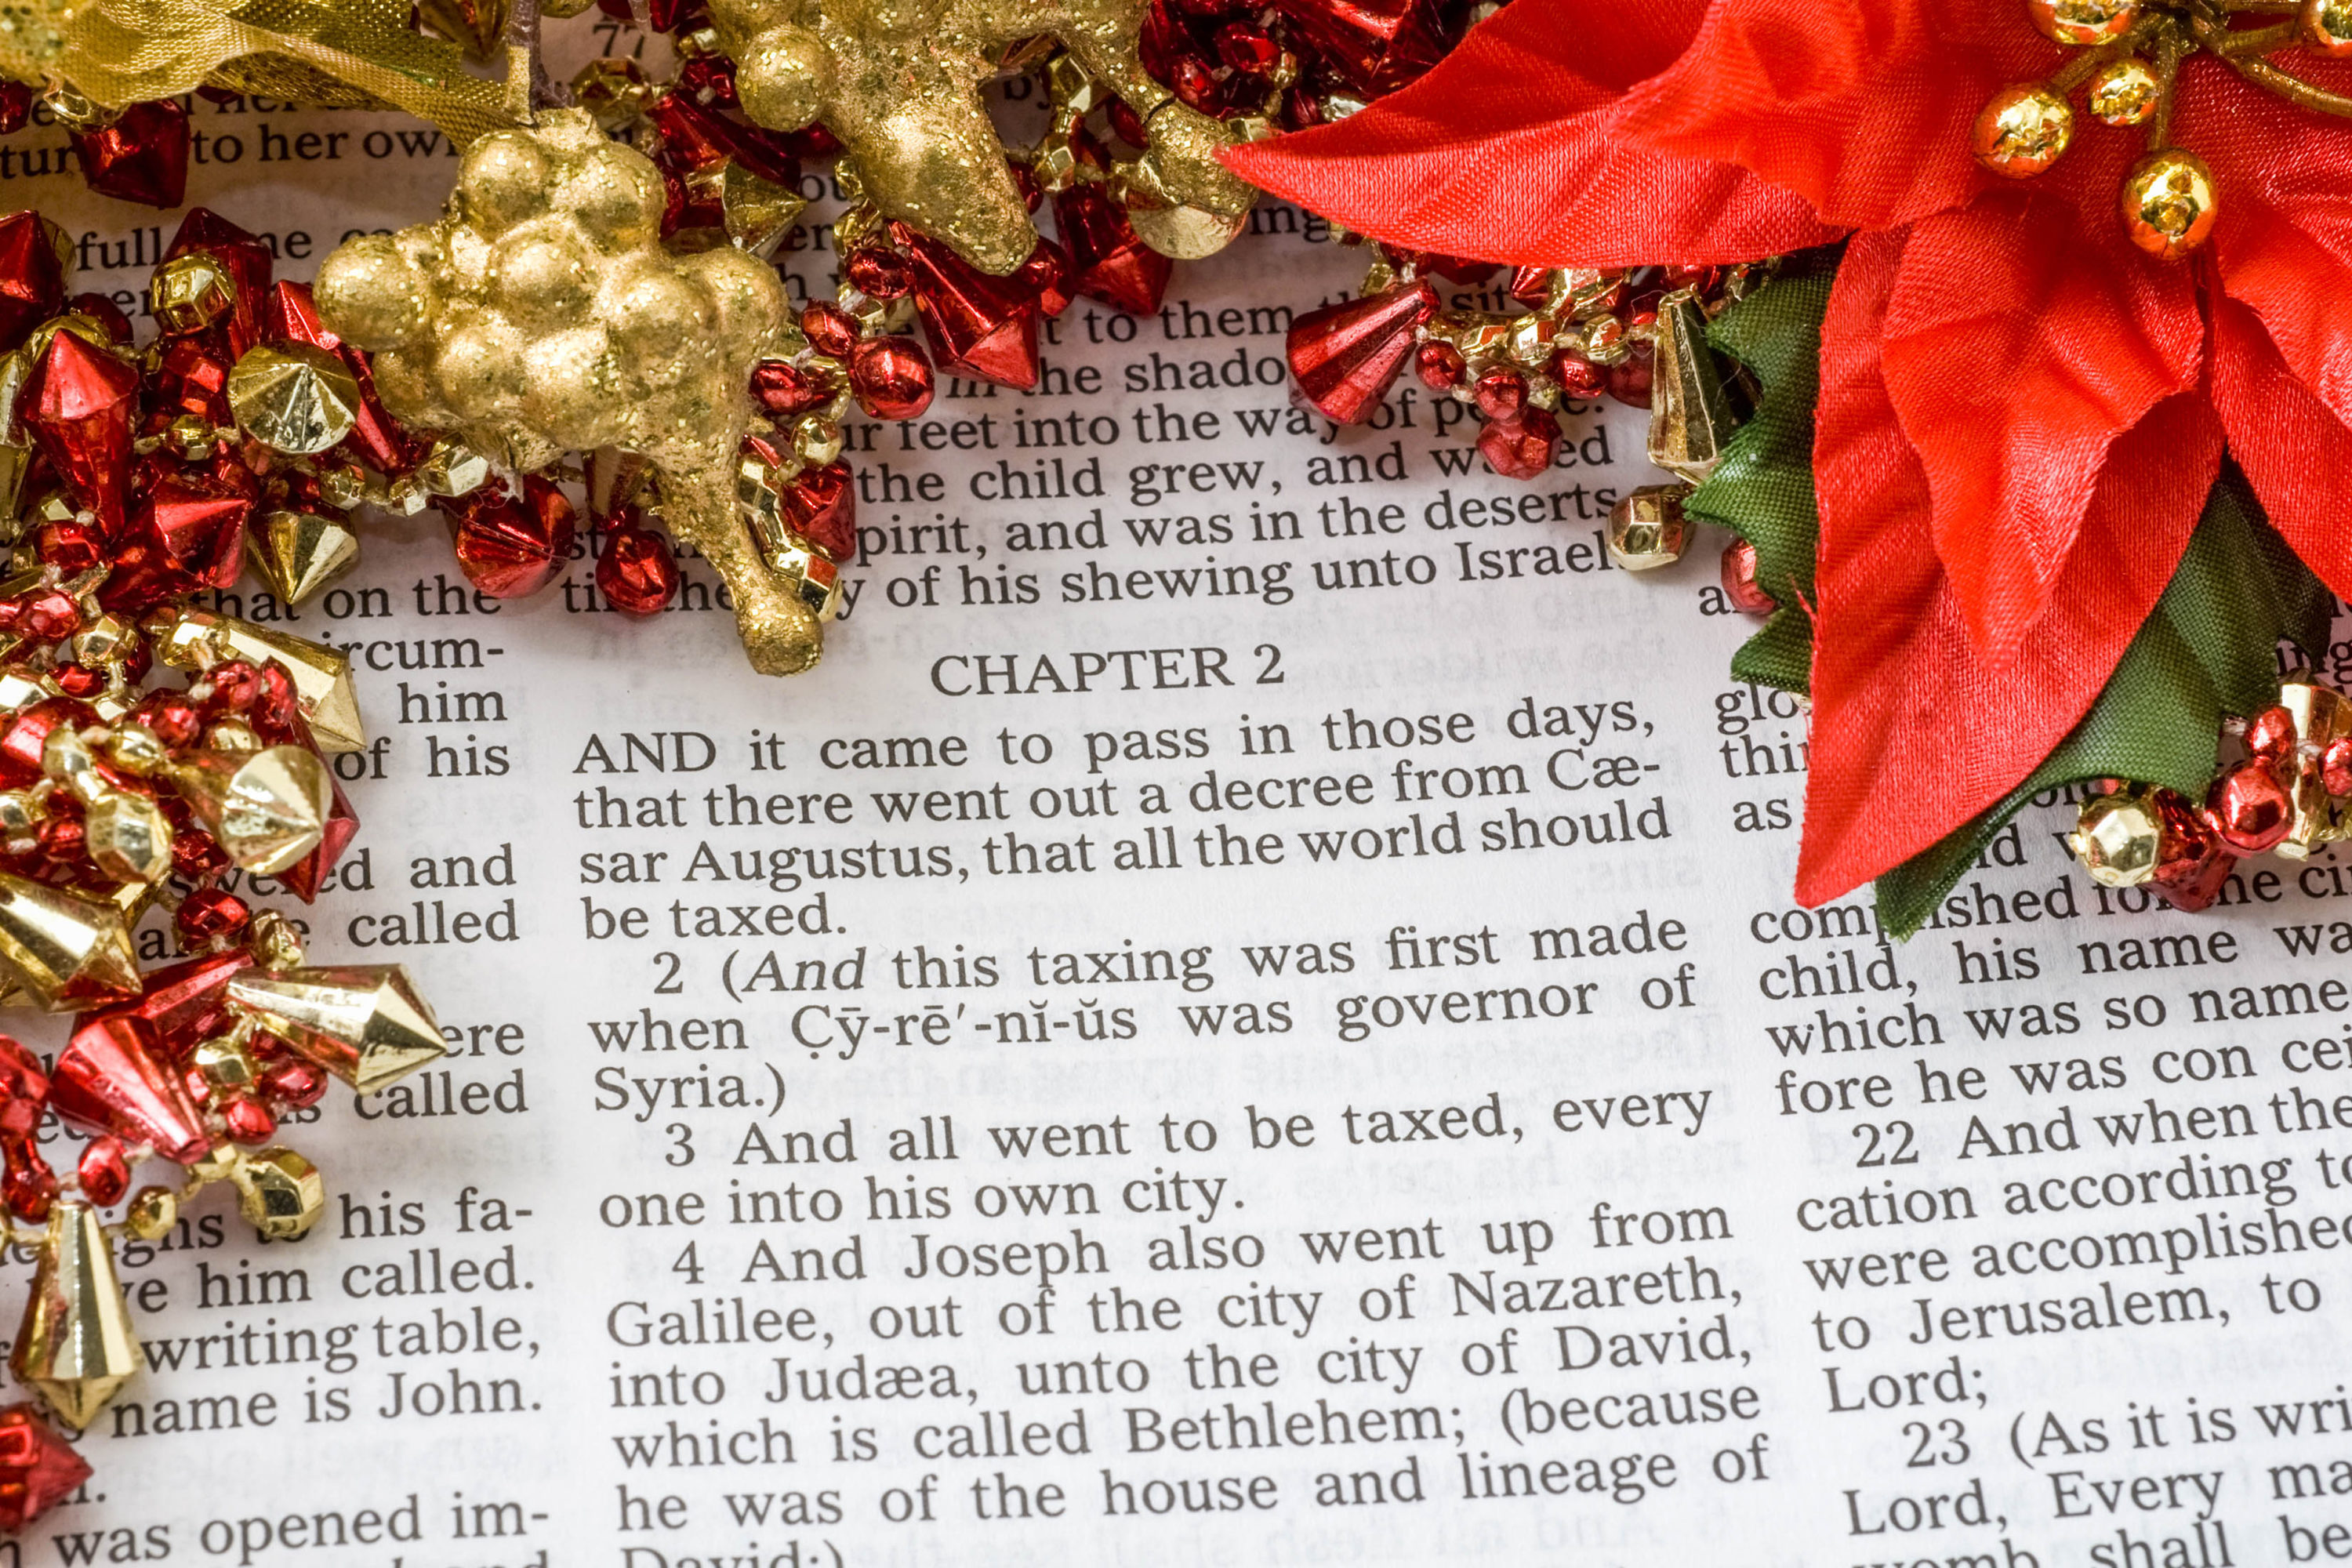 The Christmas Story as found in Luke 2 of the Bible. This is the story of the birth of our Lord and Savior, Jesus Christ, Emmanuel God with us. Jesus came, born of the flesh to die to save us all from our sins. He came to do the will of the Father.